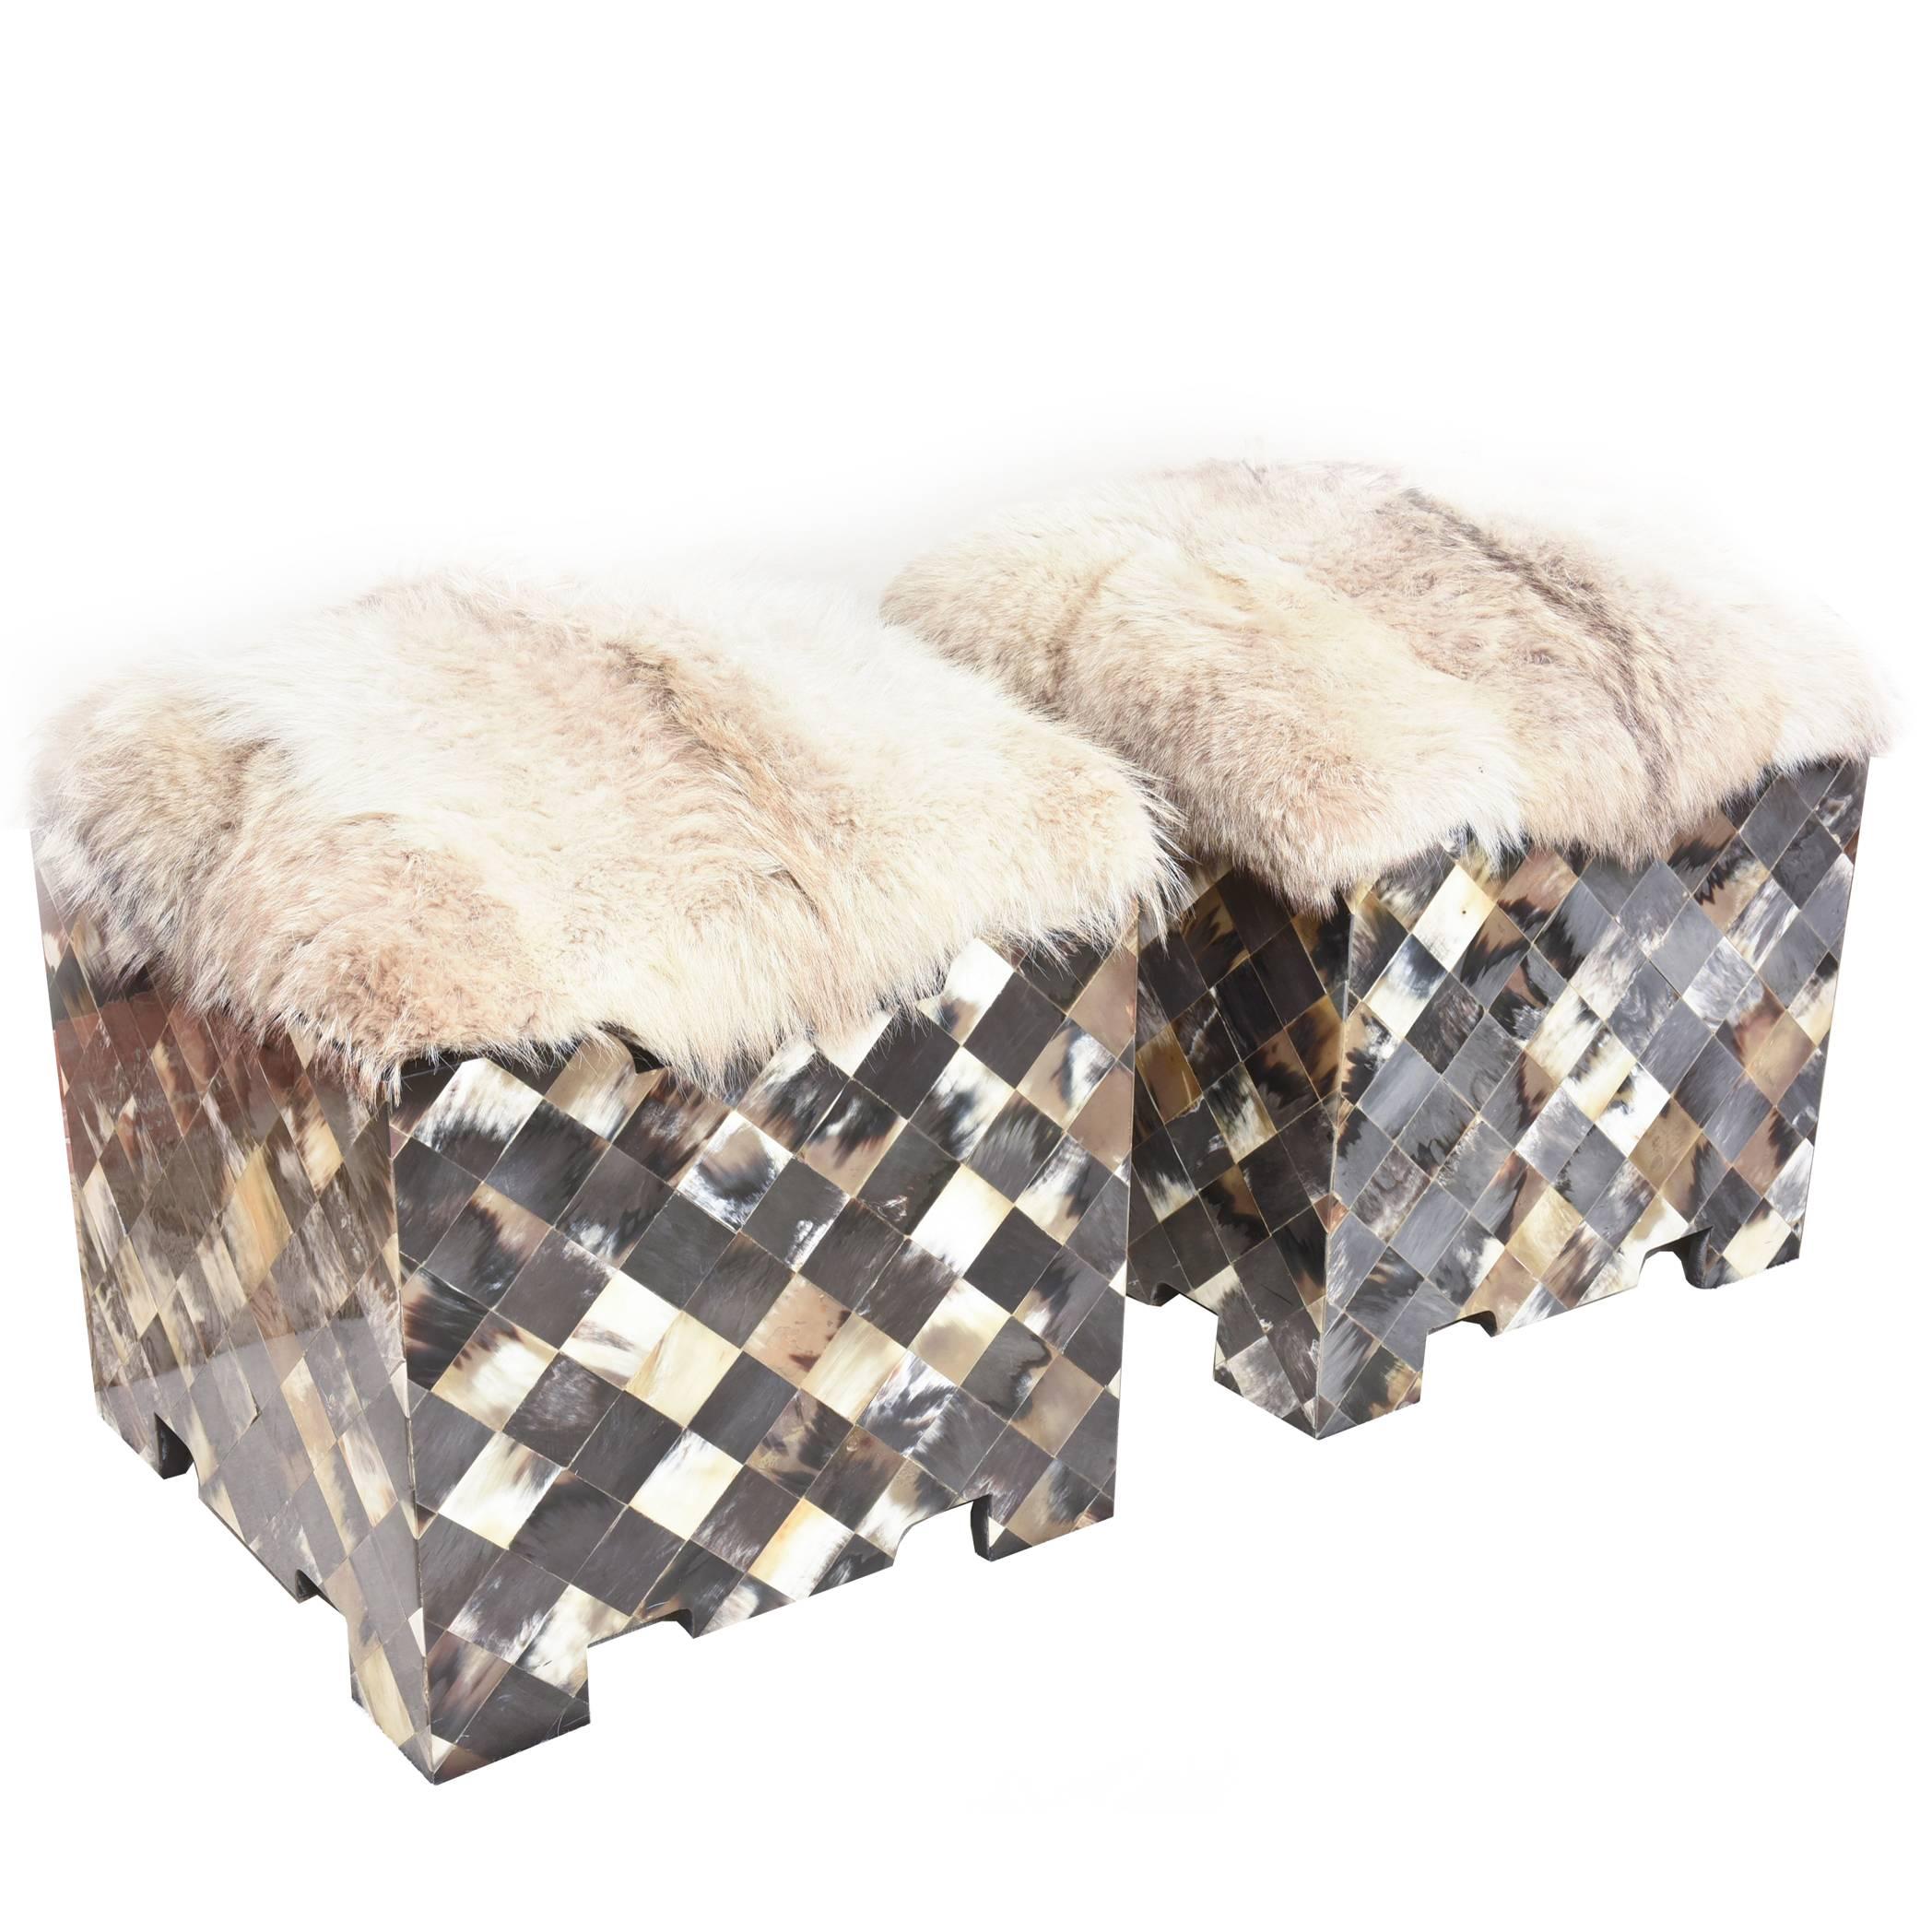 Pair of Diamond Patterned Horn and Fur Topped Benches or Ottomans